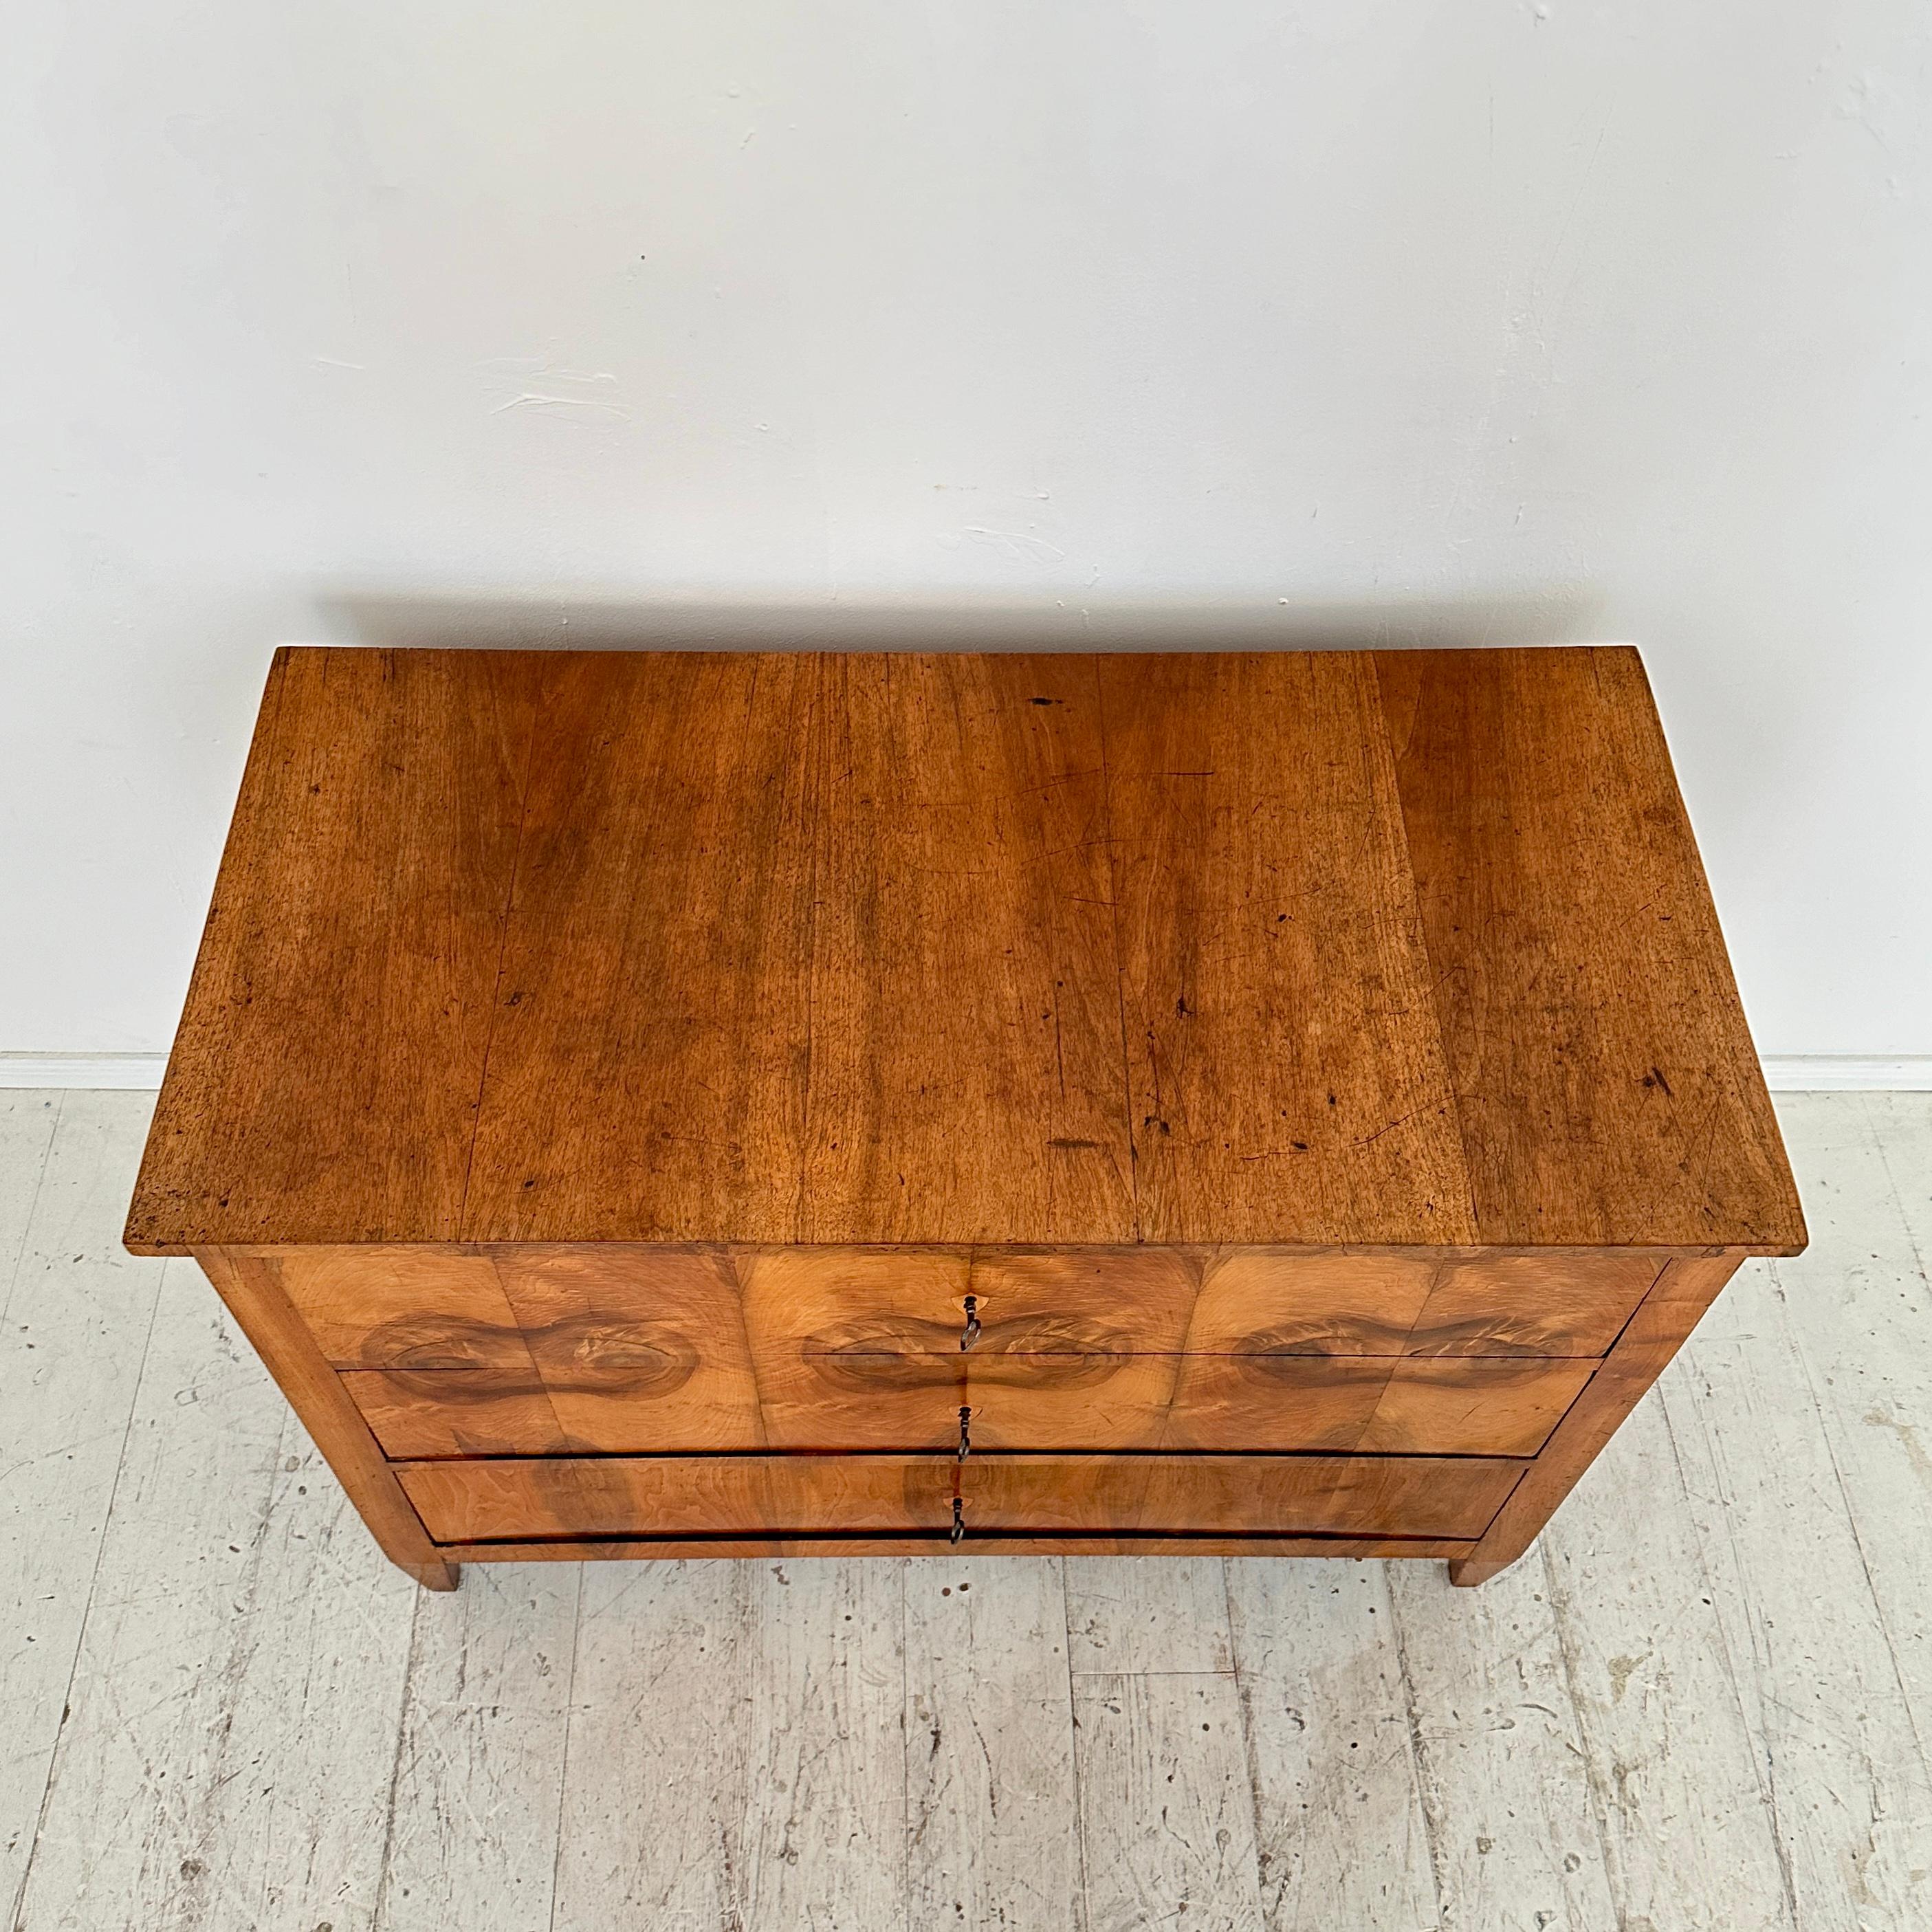 19th Century German Biedermeier Chest of Drawers in Walnut with 3 Drawers, 1820 For Sale 5